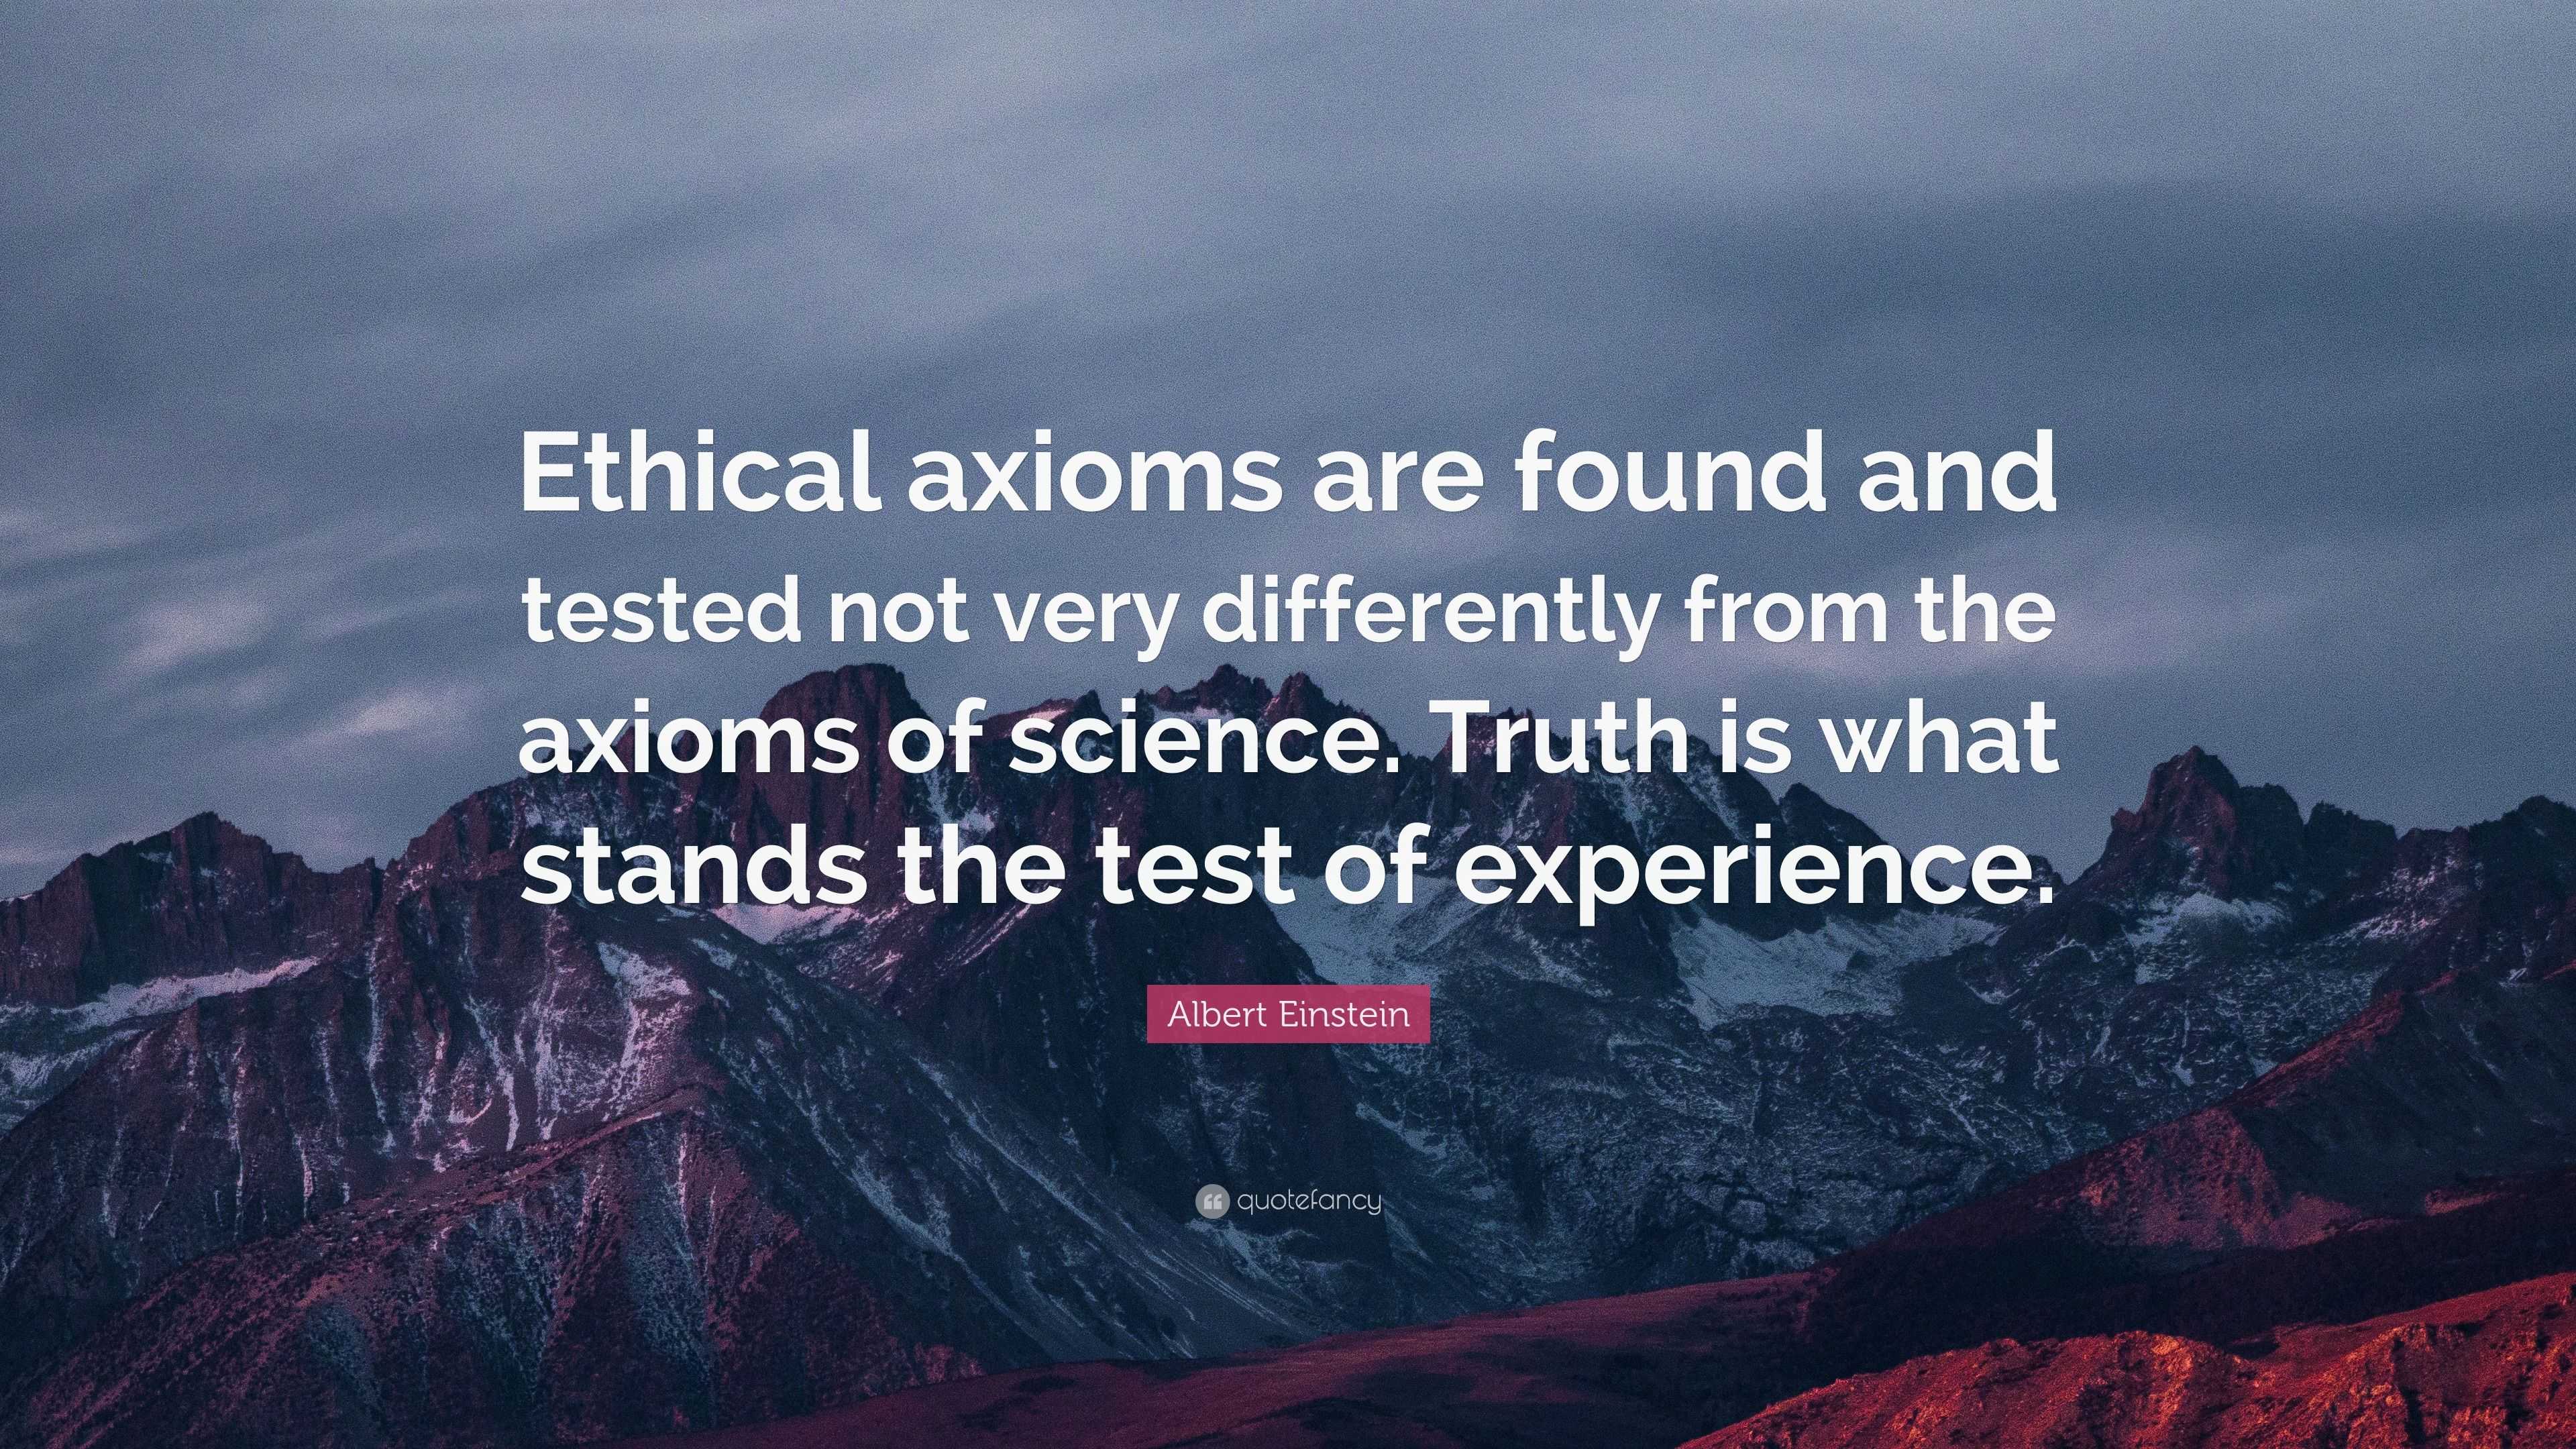 Albert Einstein Quote: “Ethical axioms are found and tested not very ... Energy Physics Quotes